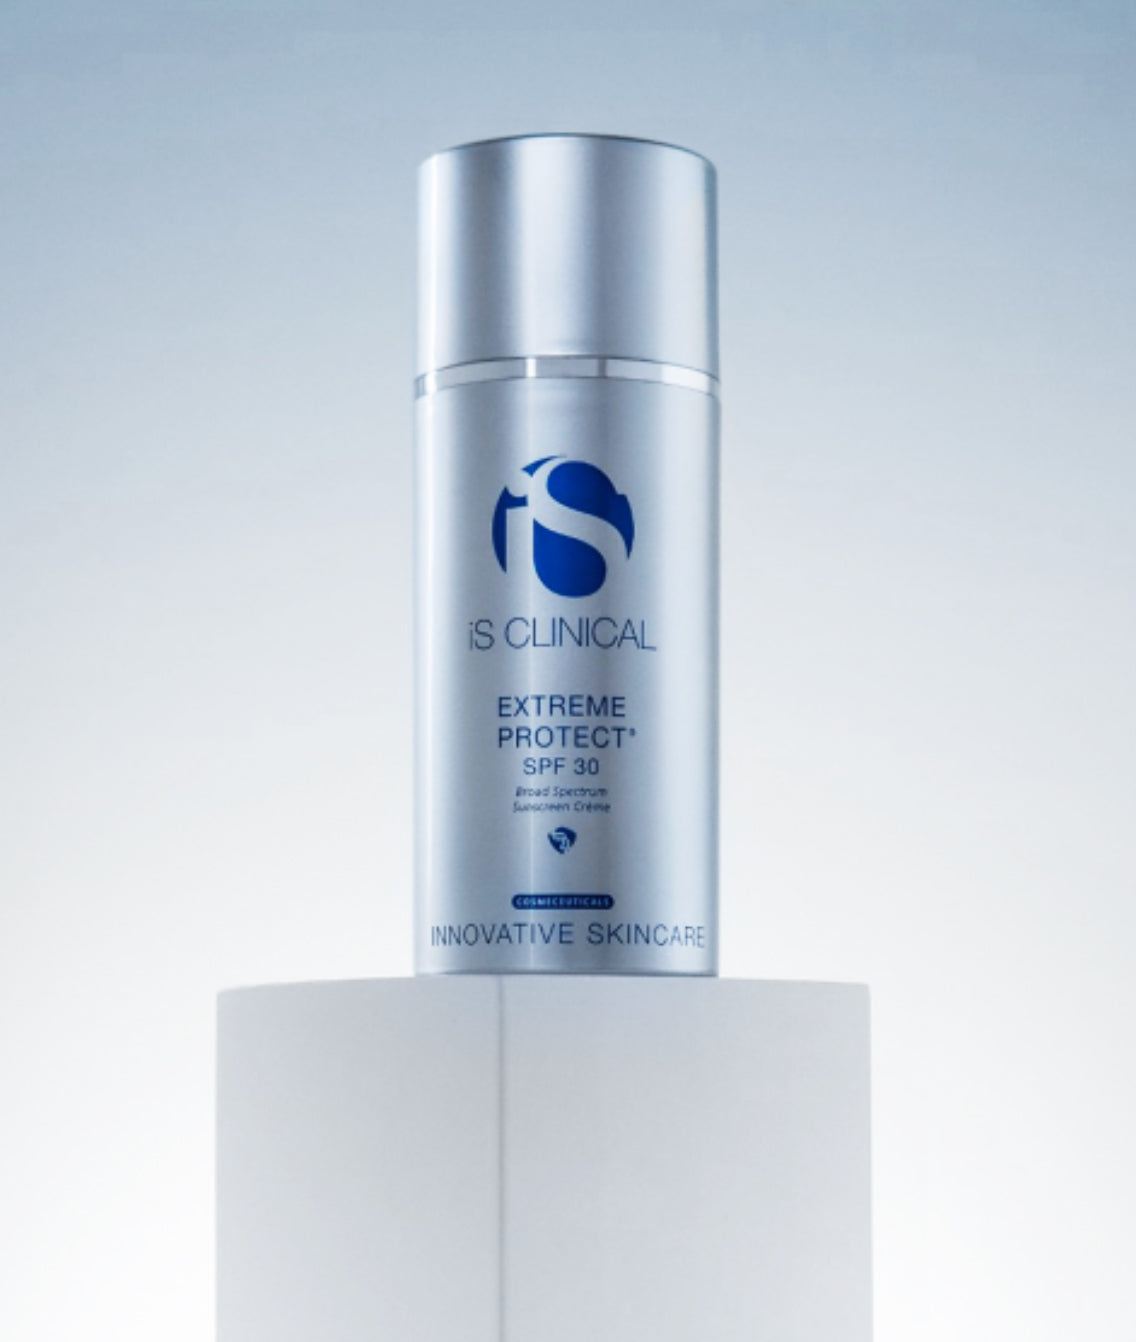 Extreme Protect SPF 30 iS Clinical Skincare